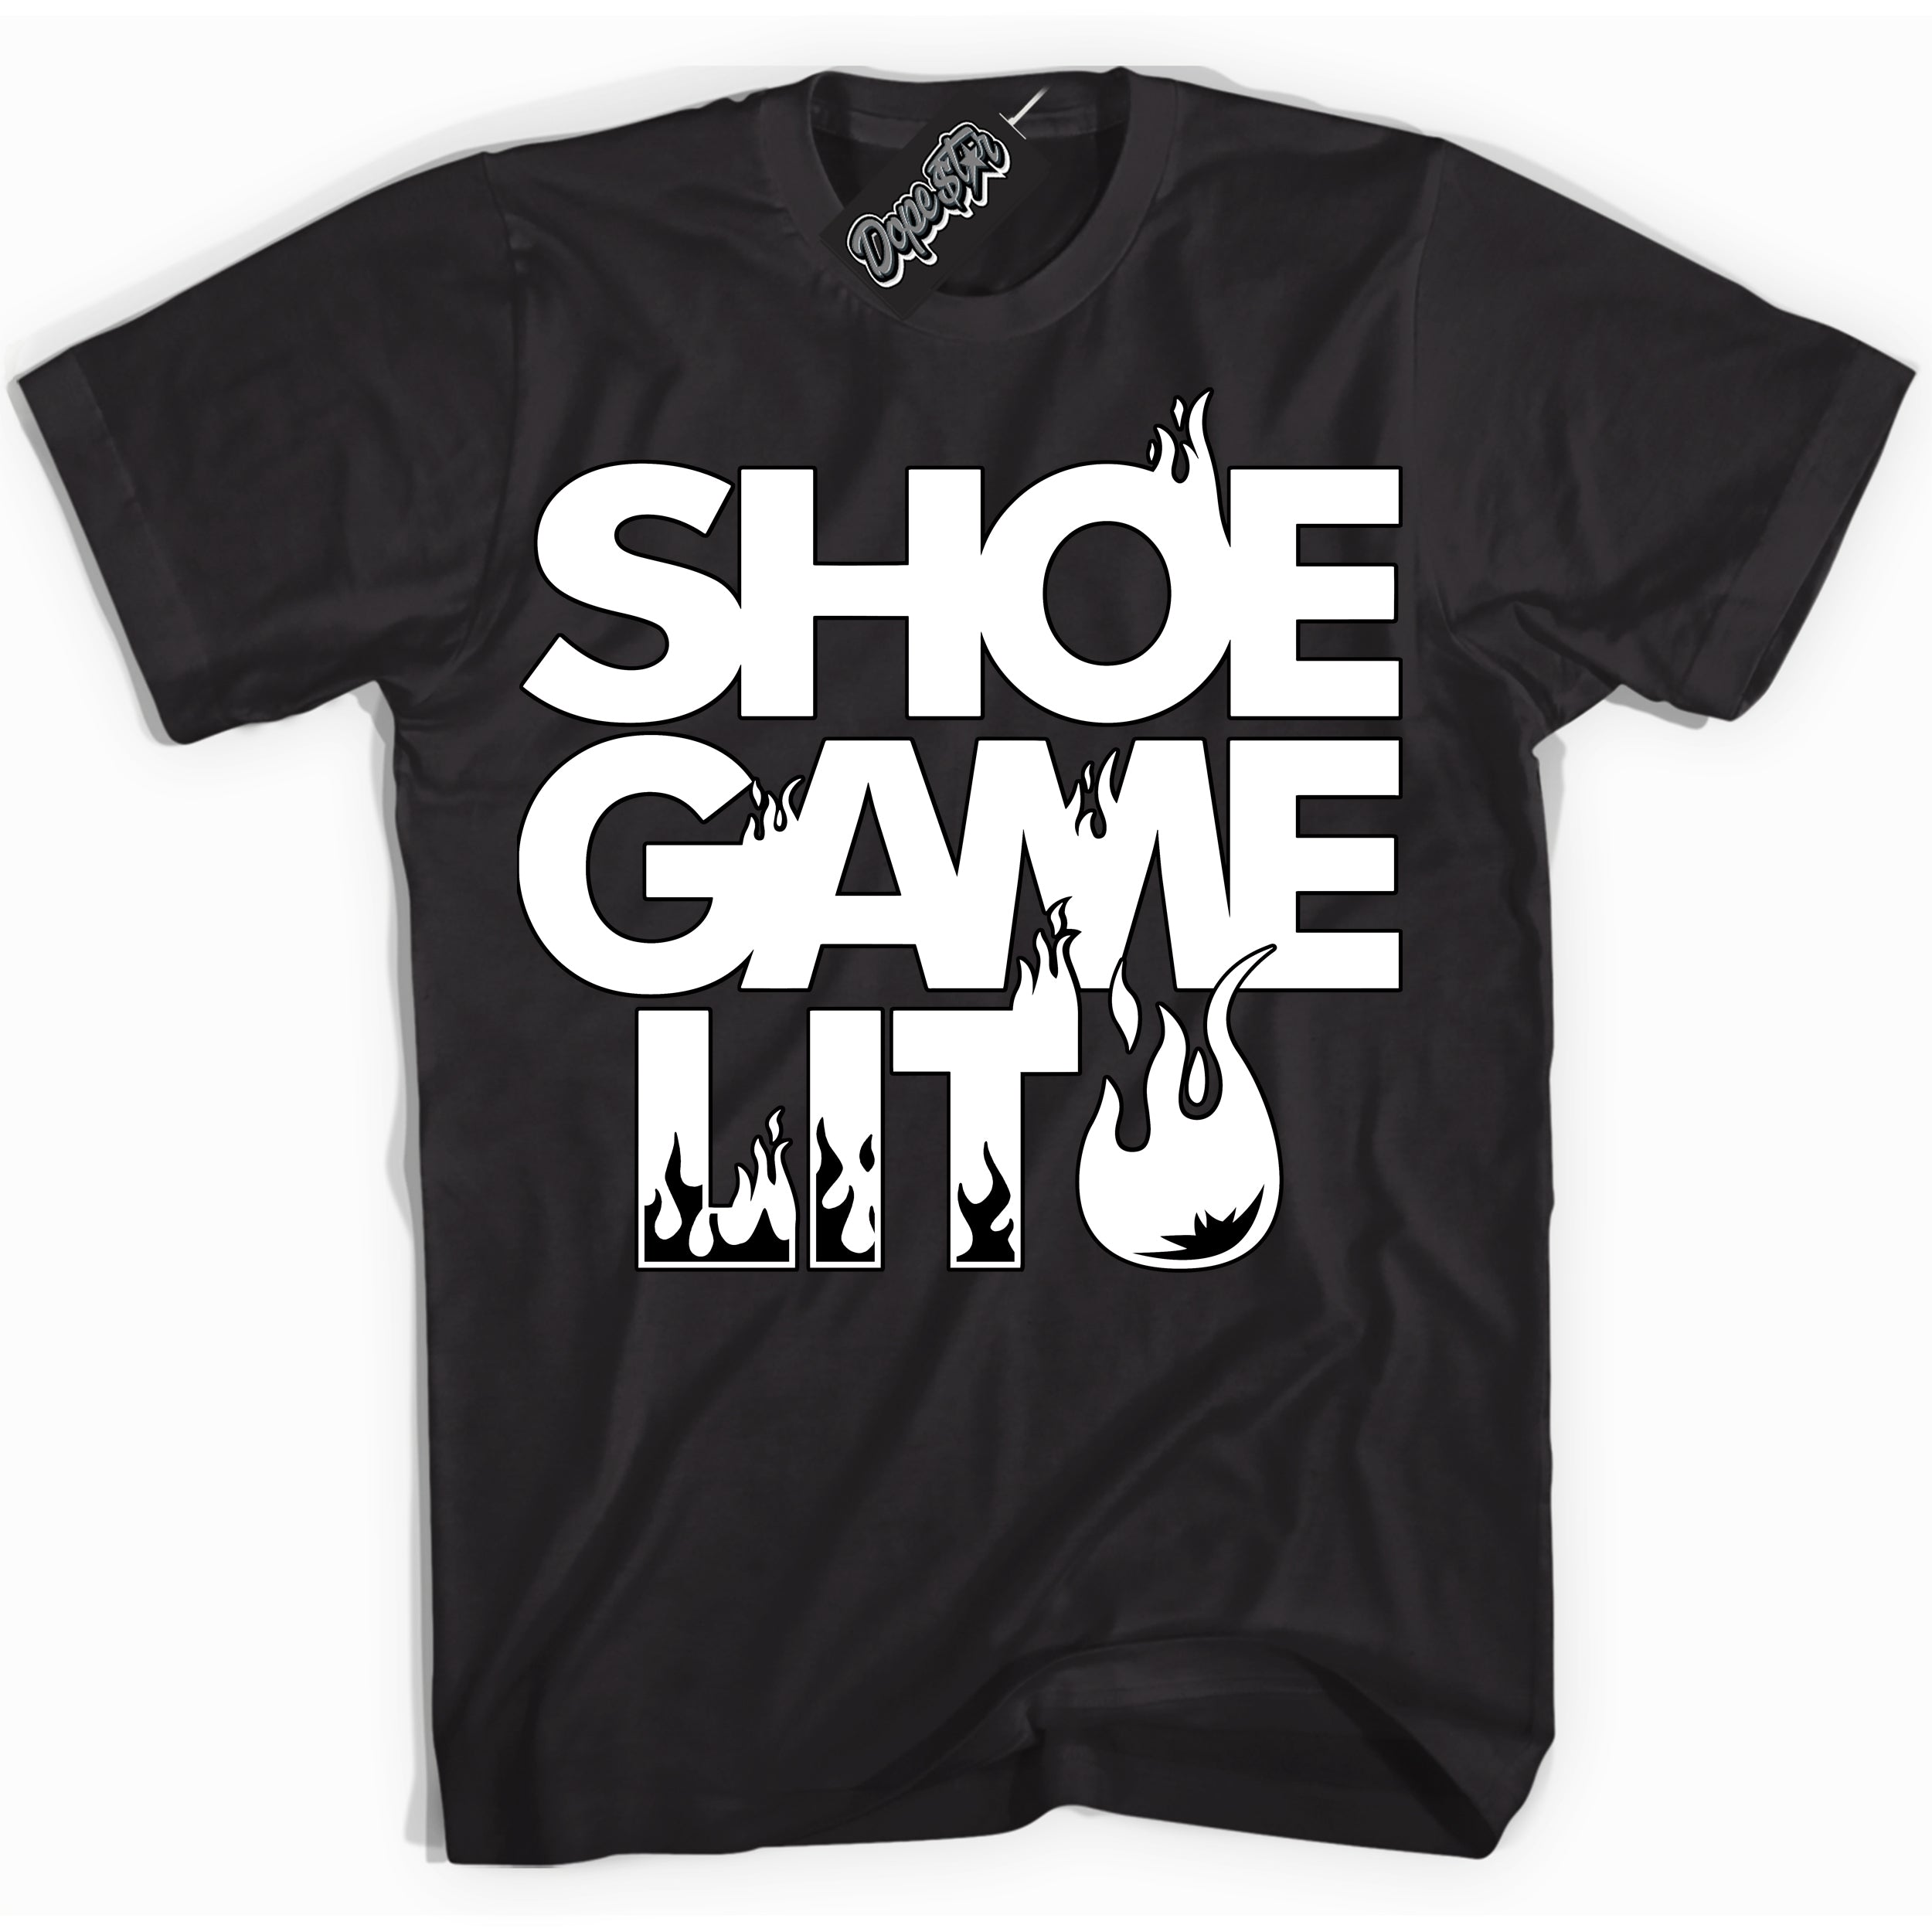 Cool Black Shirt with “ Shoe Game Lit ” design that perfectly matches '85 Black White 1s Sneakers.